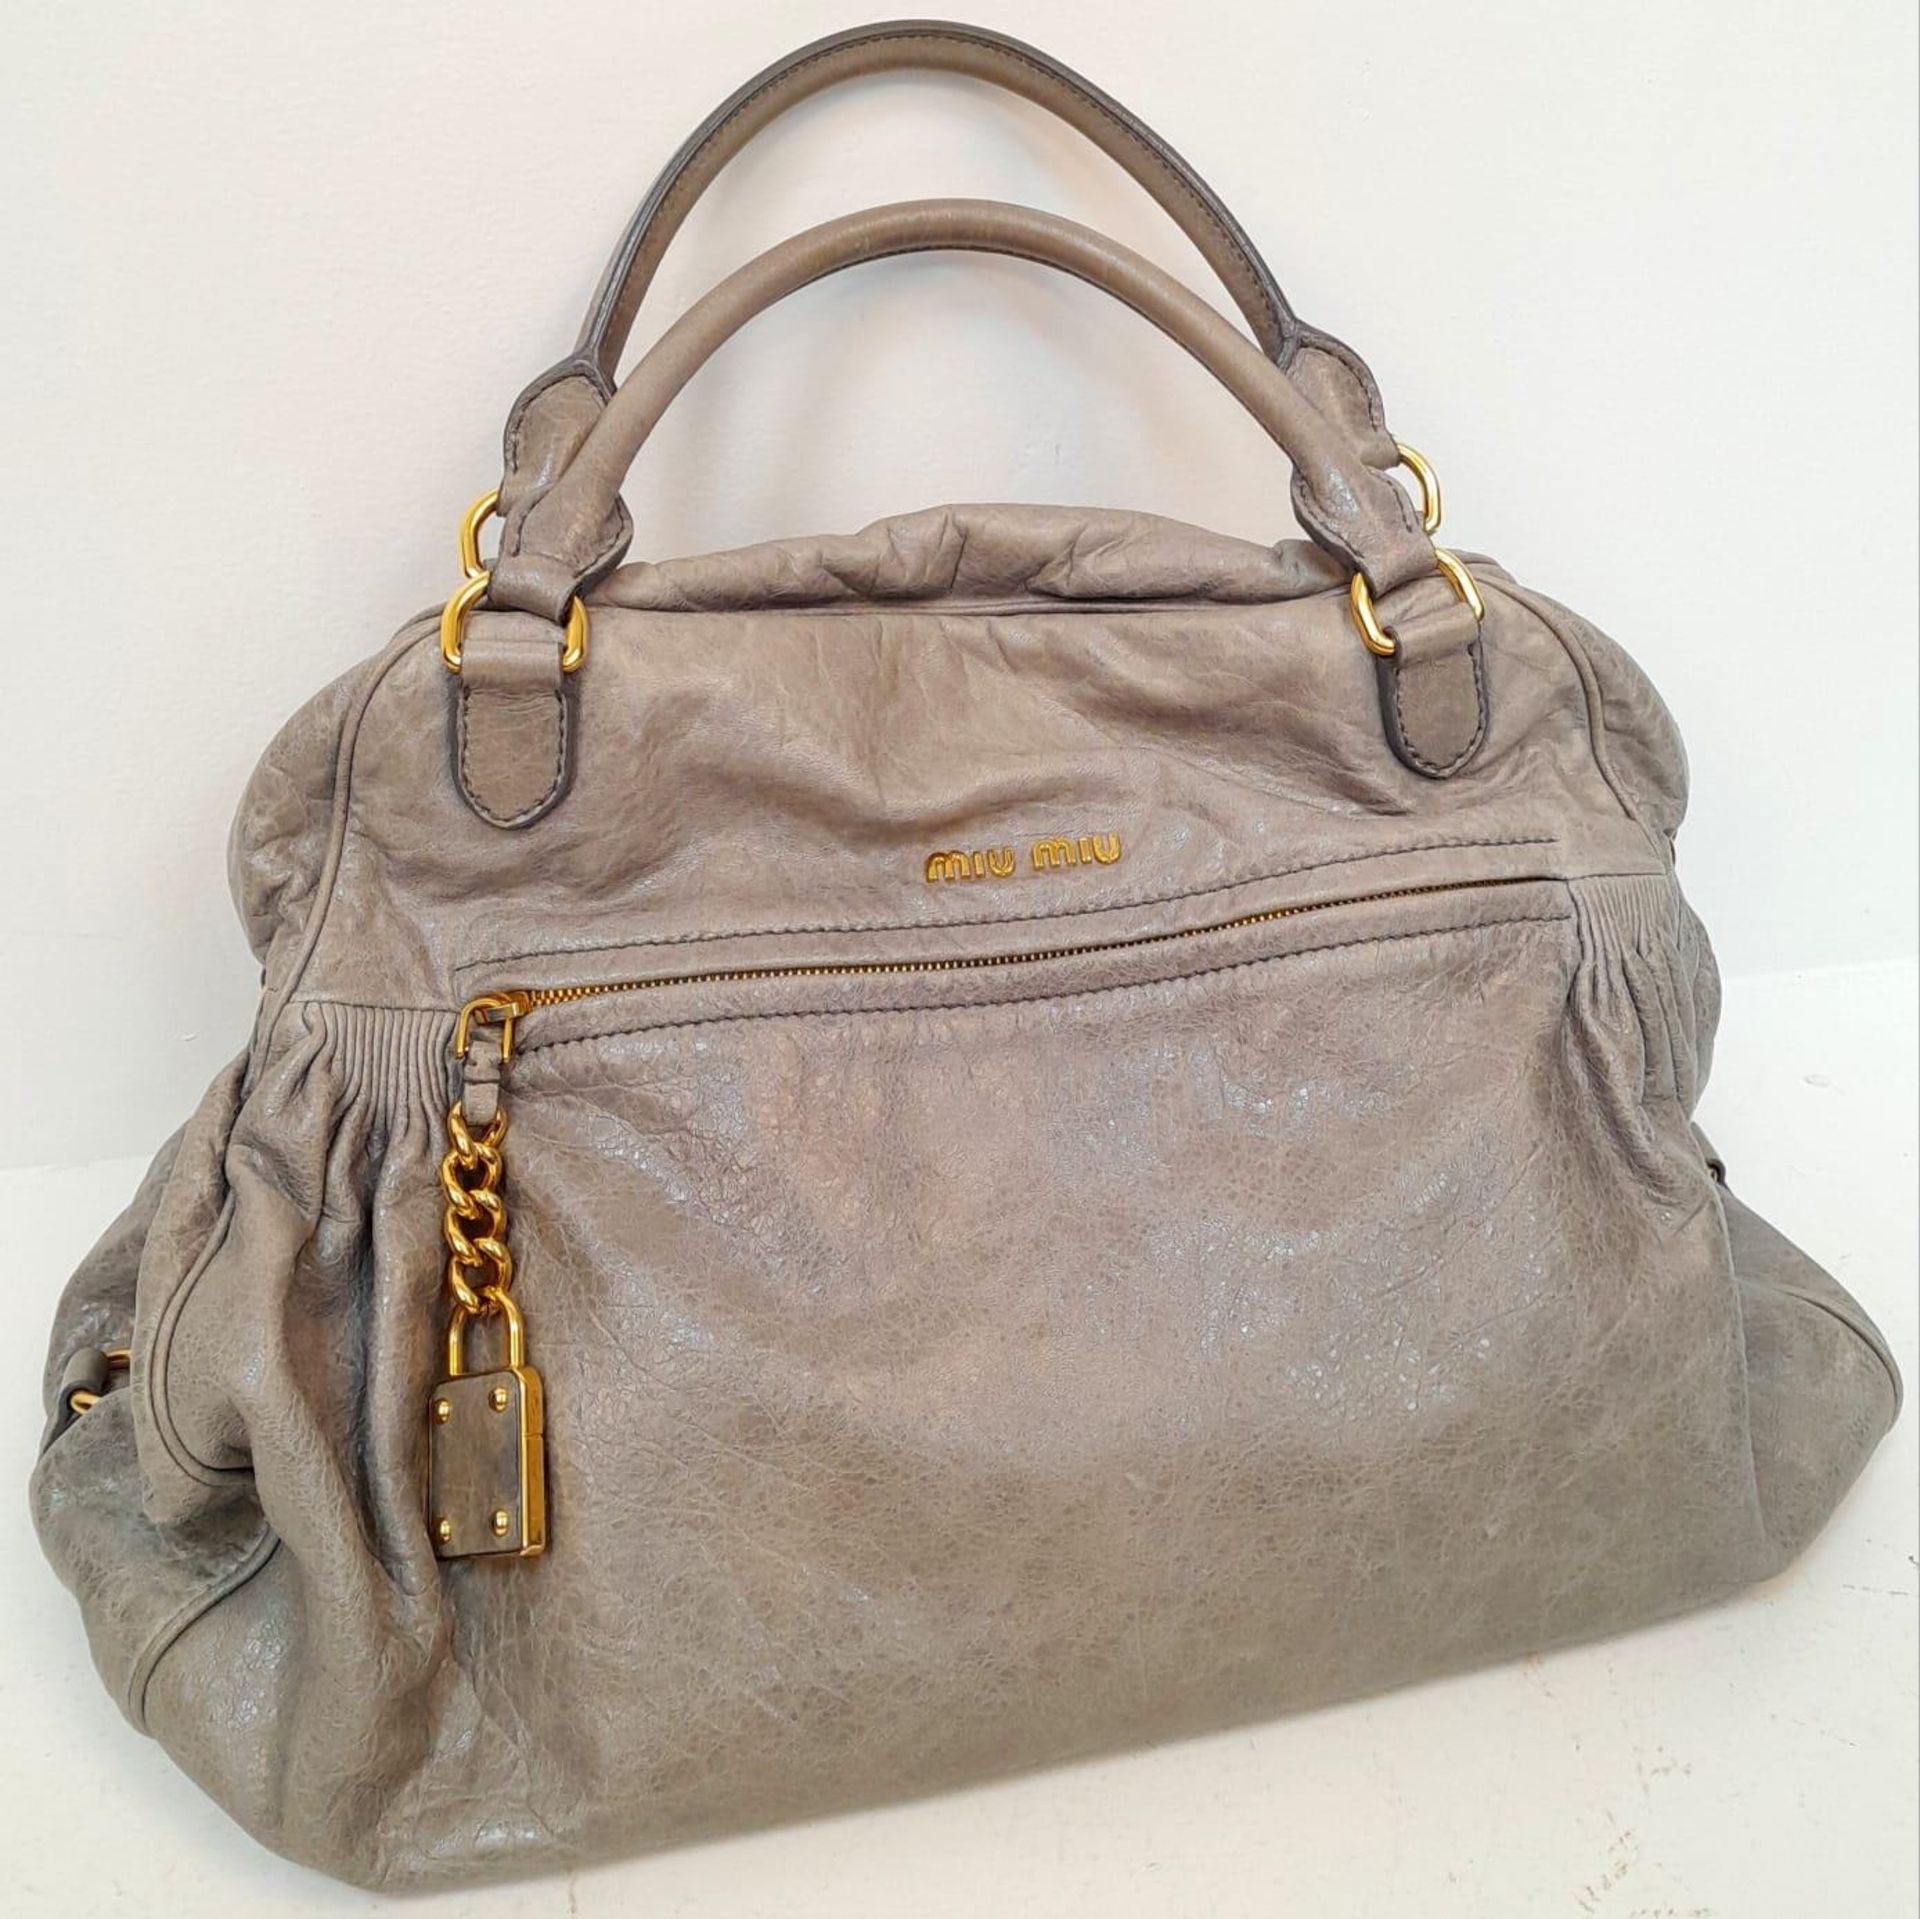 A Miu Miu Vitello Leather Handbag. Textured grey leather exterior with large zipped compartment. - Image 2 of 9